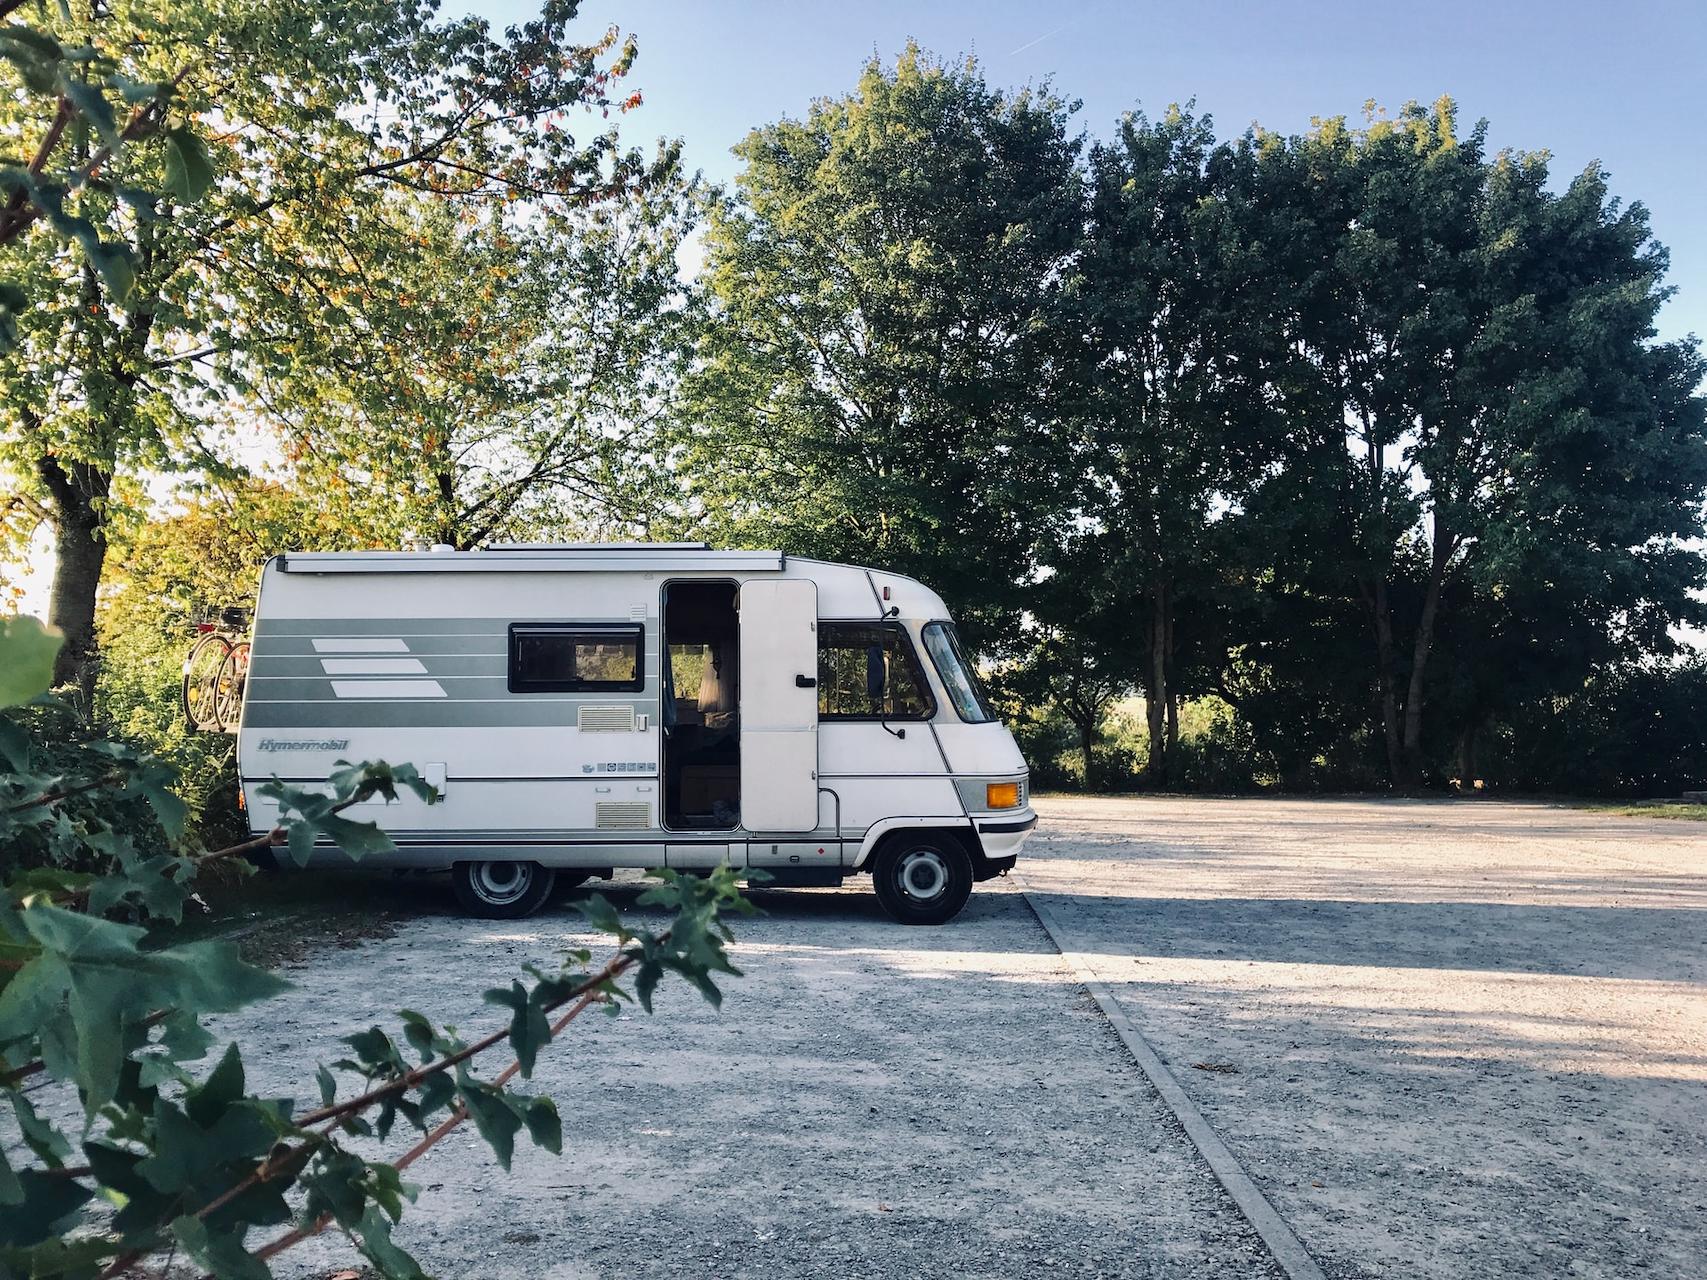 What Are The Key Advantages Of Opting For Campervan Conversions?